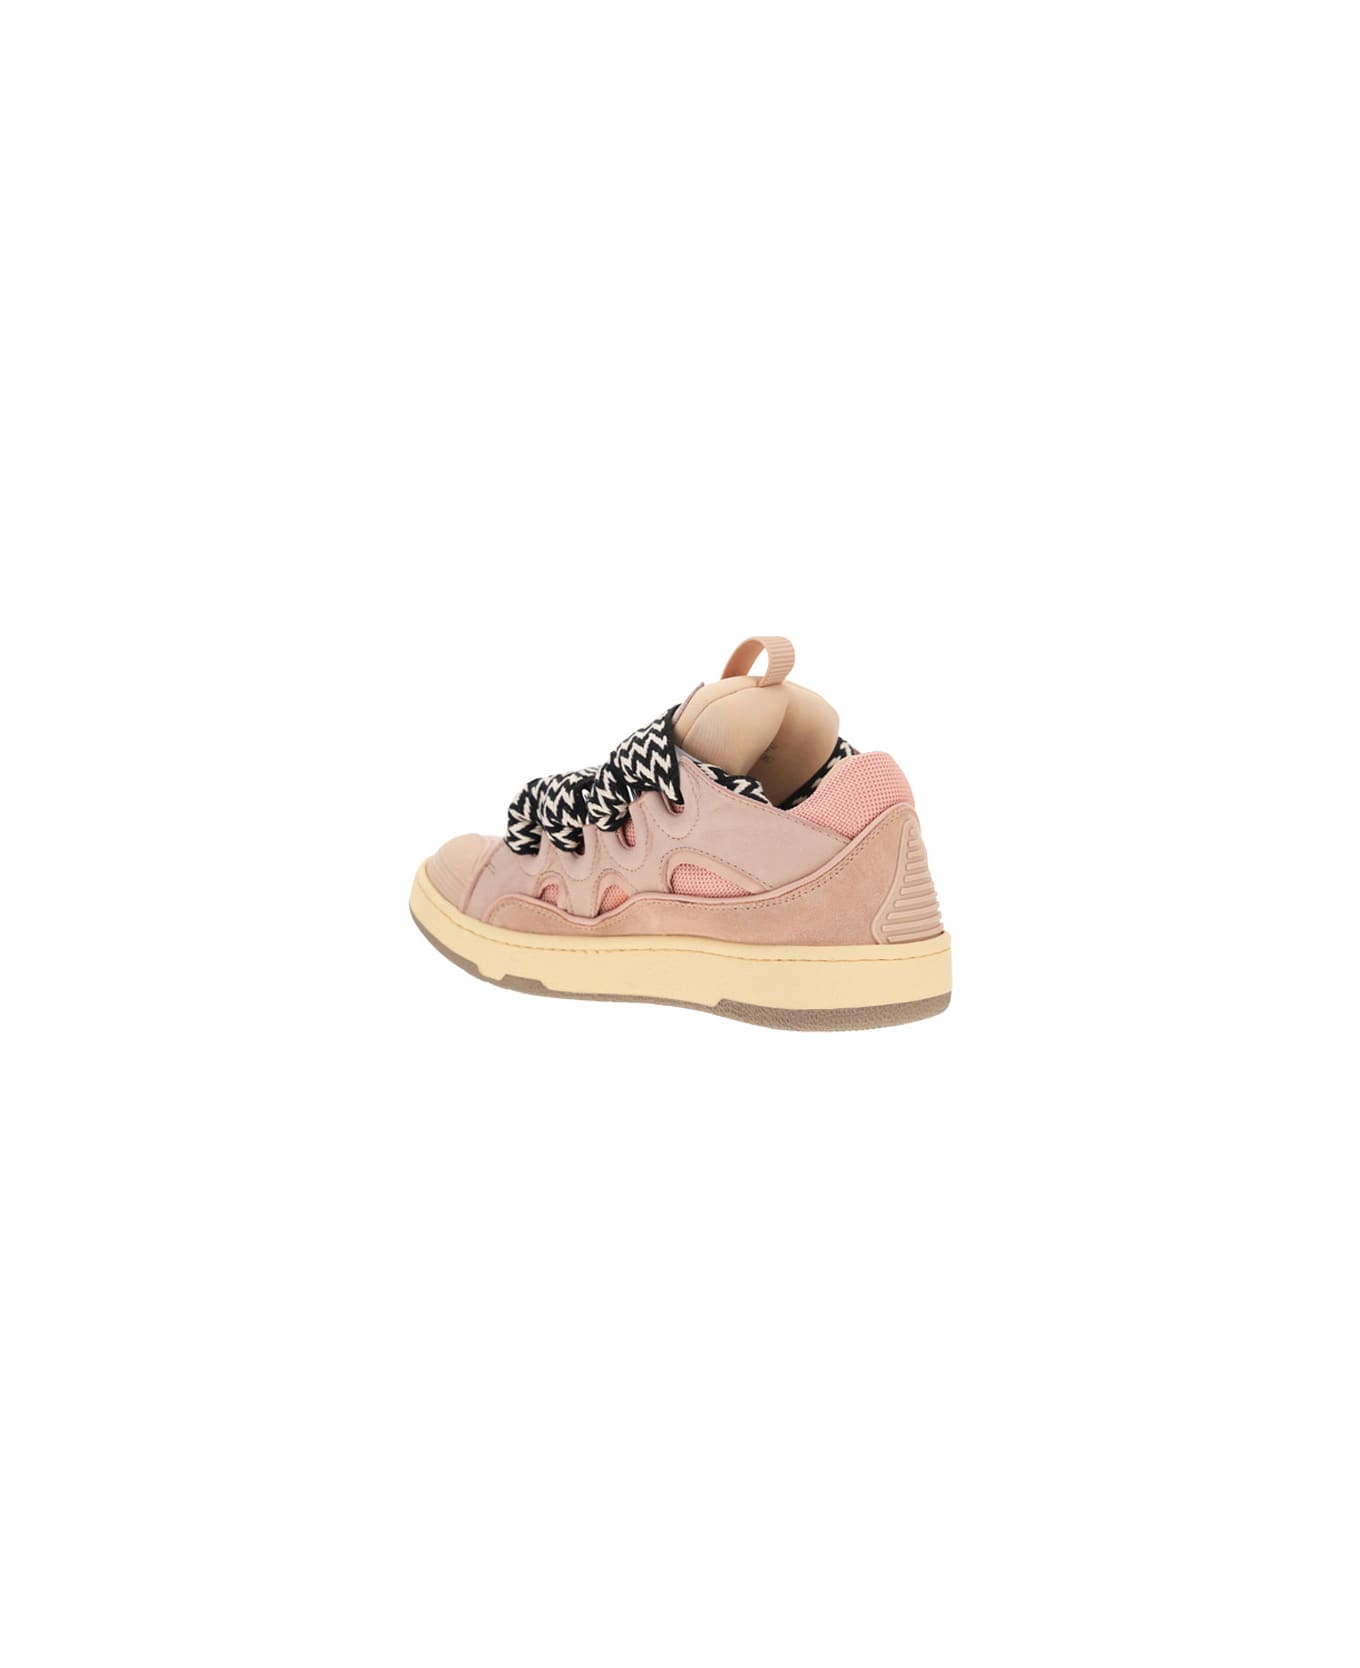 Lanvin Curb Sneakers In Pink Leather - Pale Pink